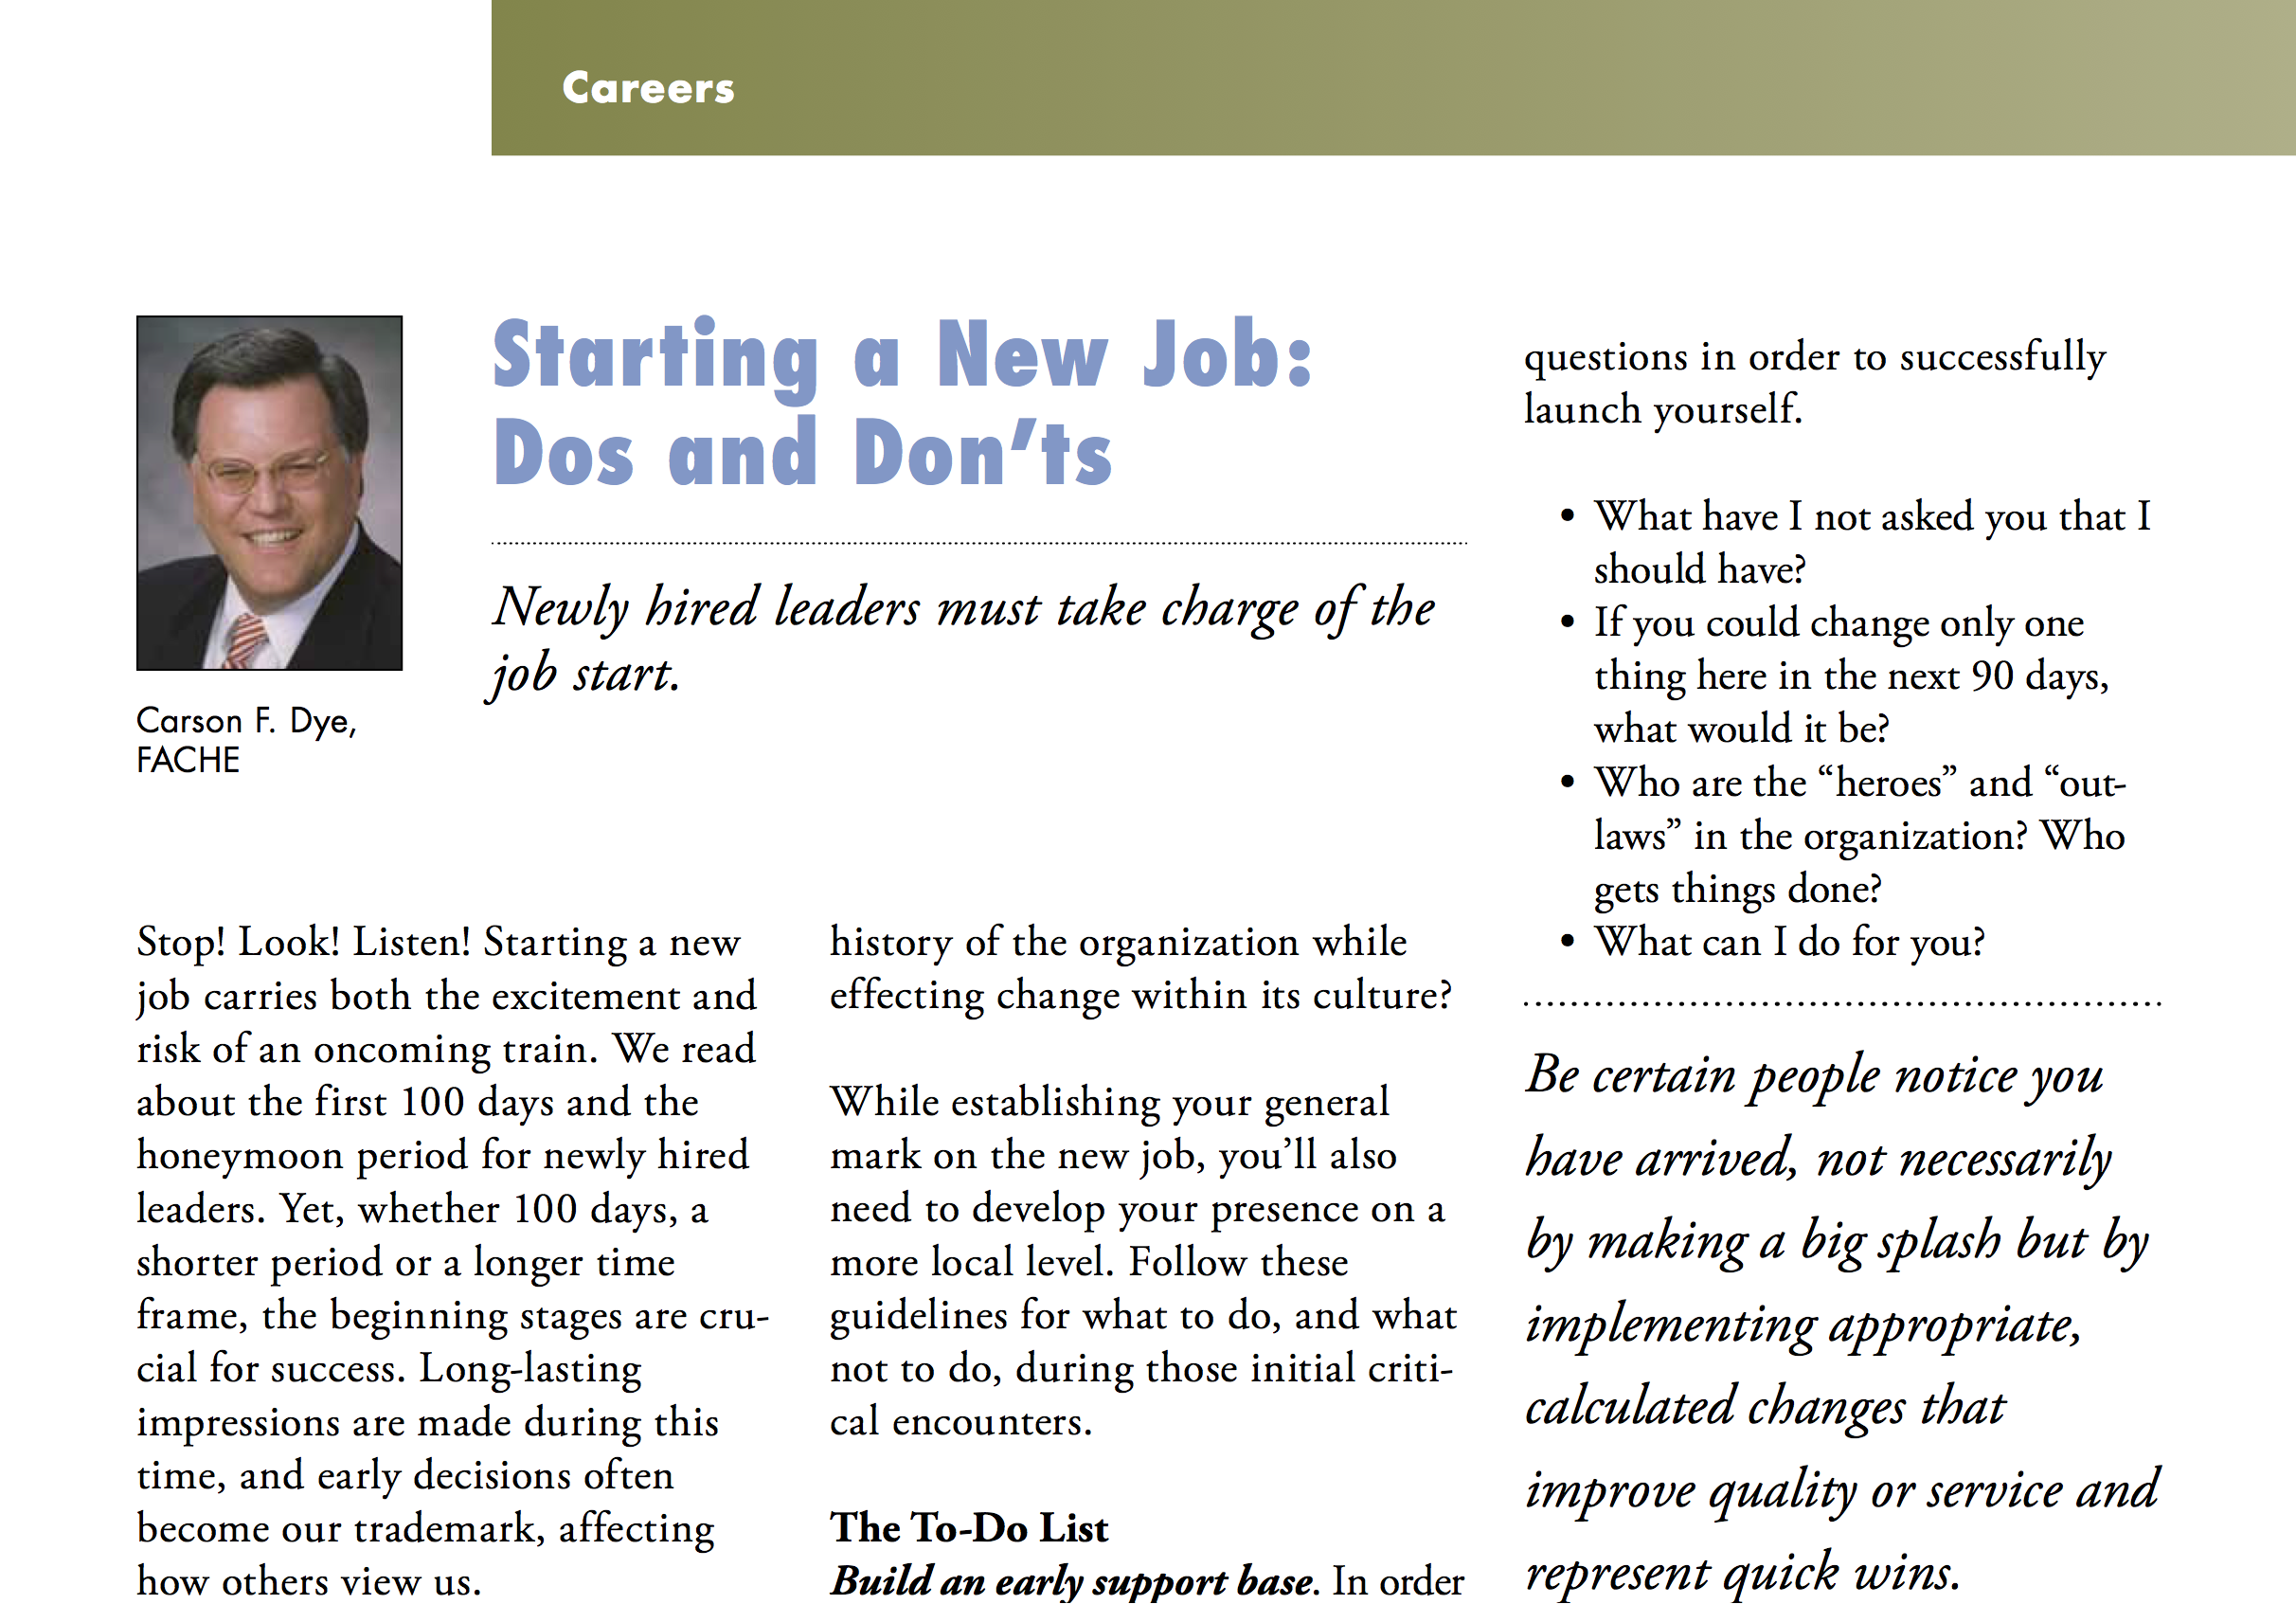 Reprinted from Healthcare Executive may /June 2011 - Starting a New Job: Dos and Don’ts